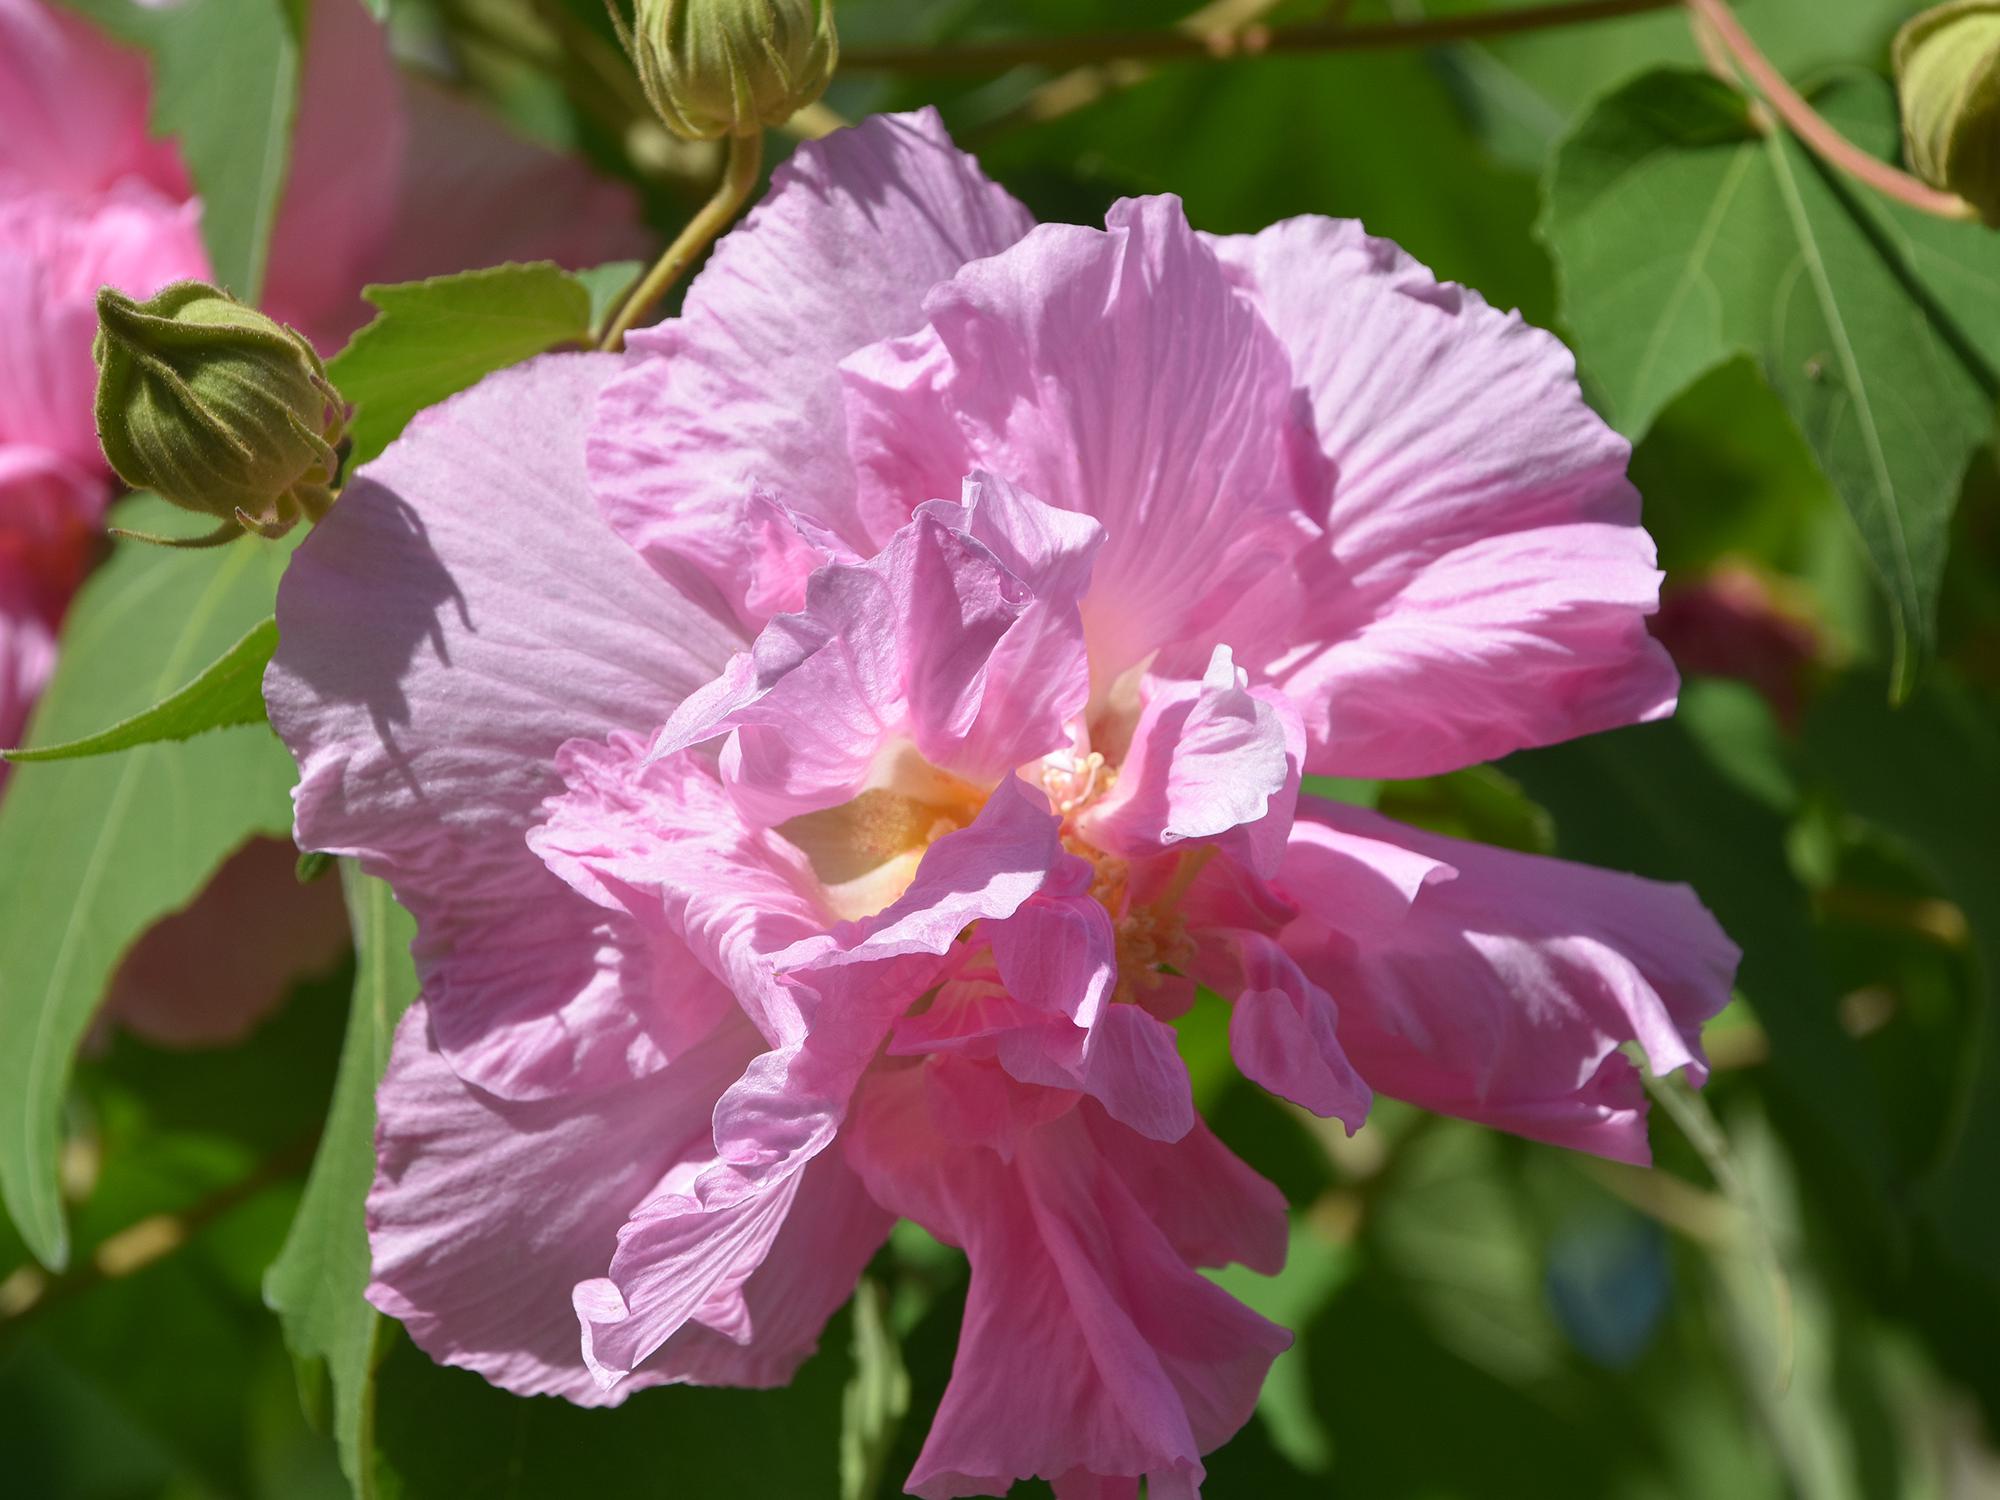 A pink flower in the foreground with foliage out of focus in the back.